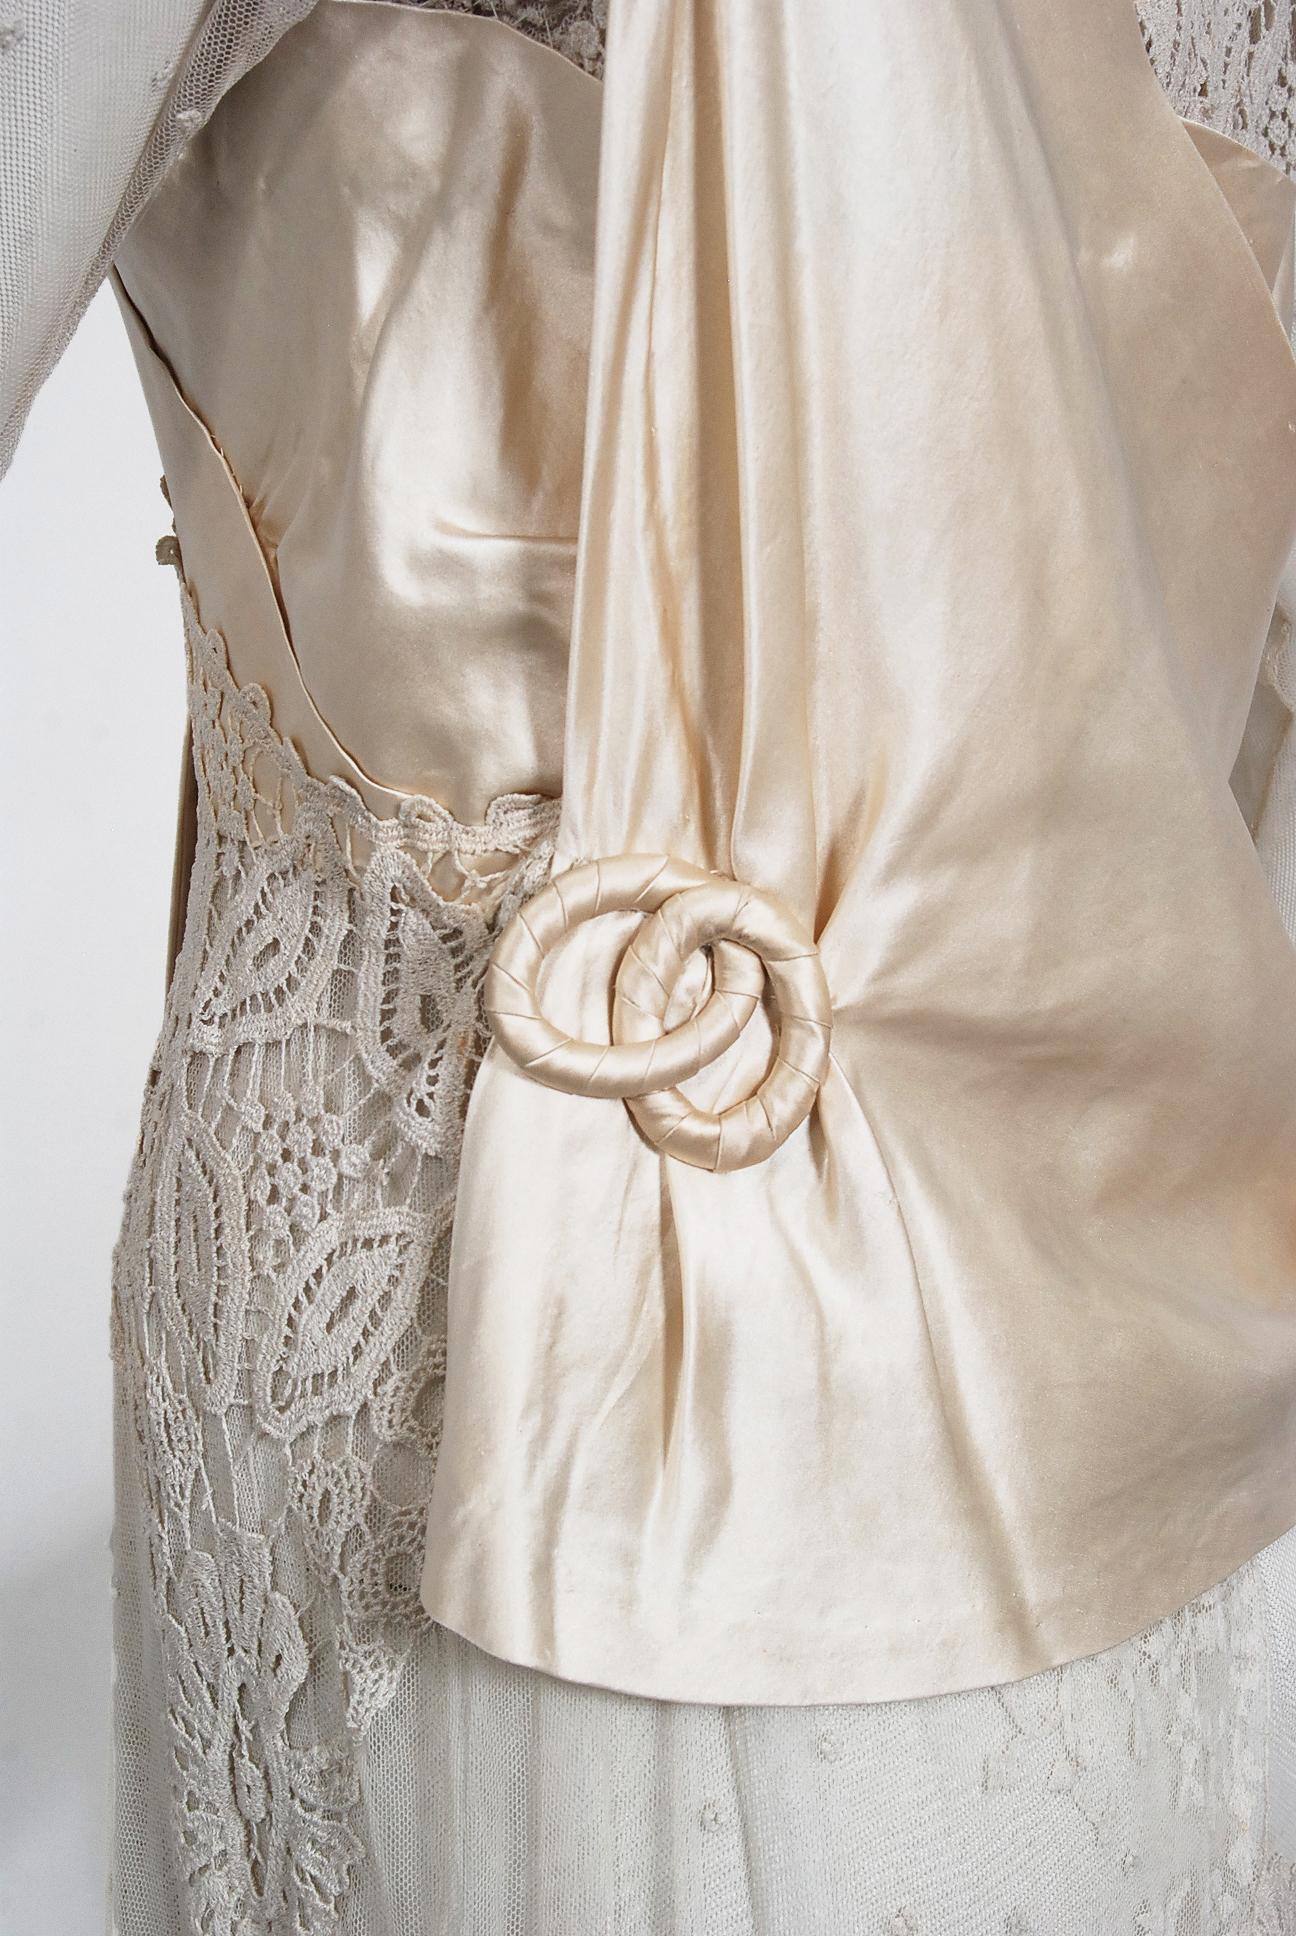 Vintage 1910's Edwardian Couture Ivory Mixed-Lace Draped Layered Bridal Dress For Sale 3